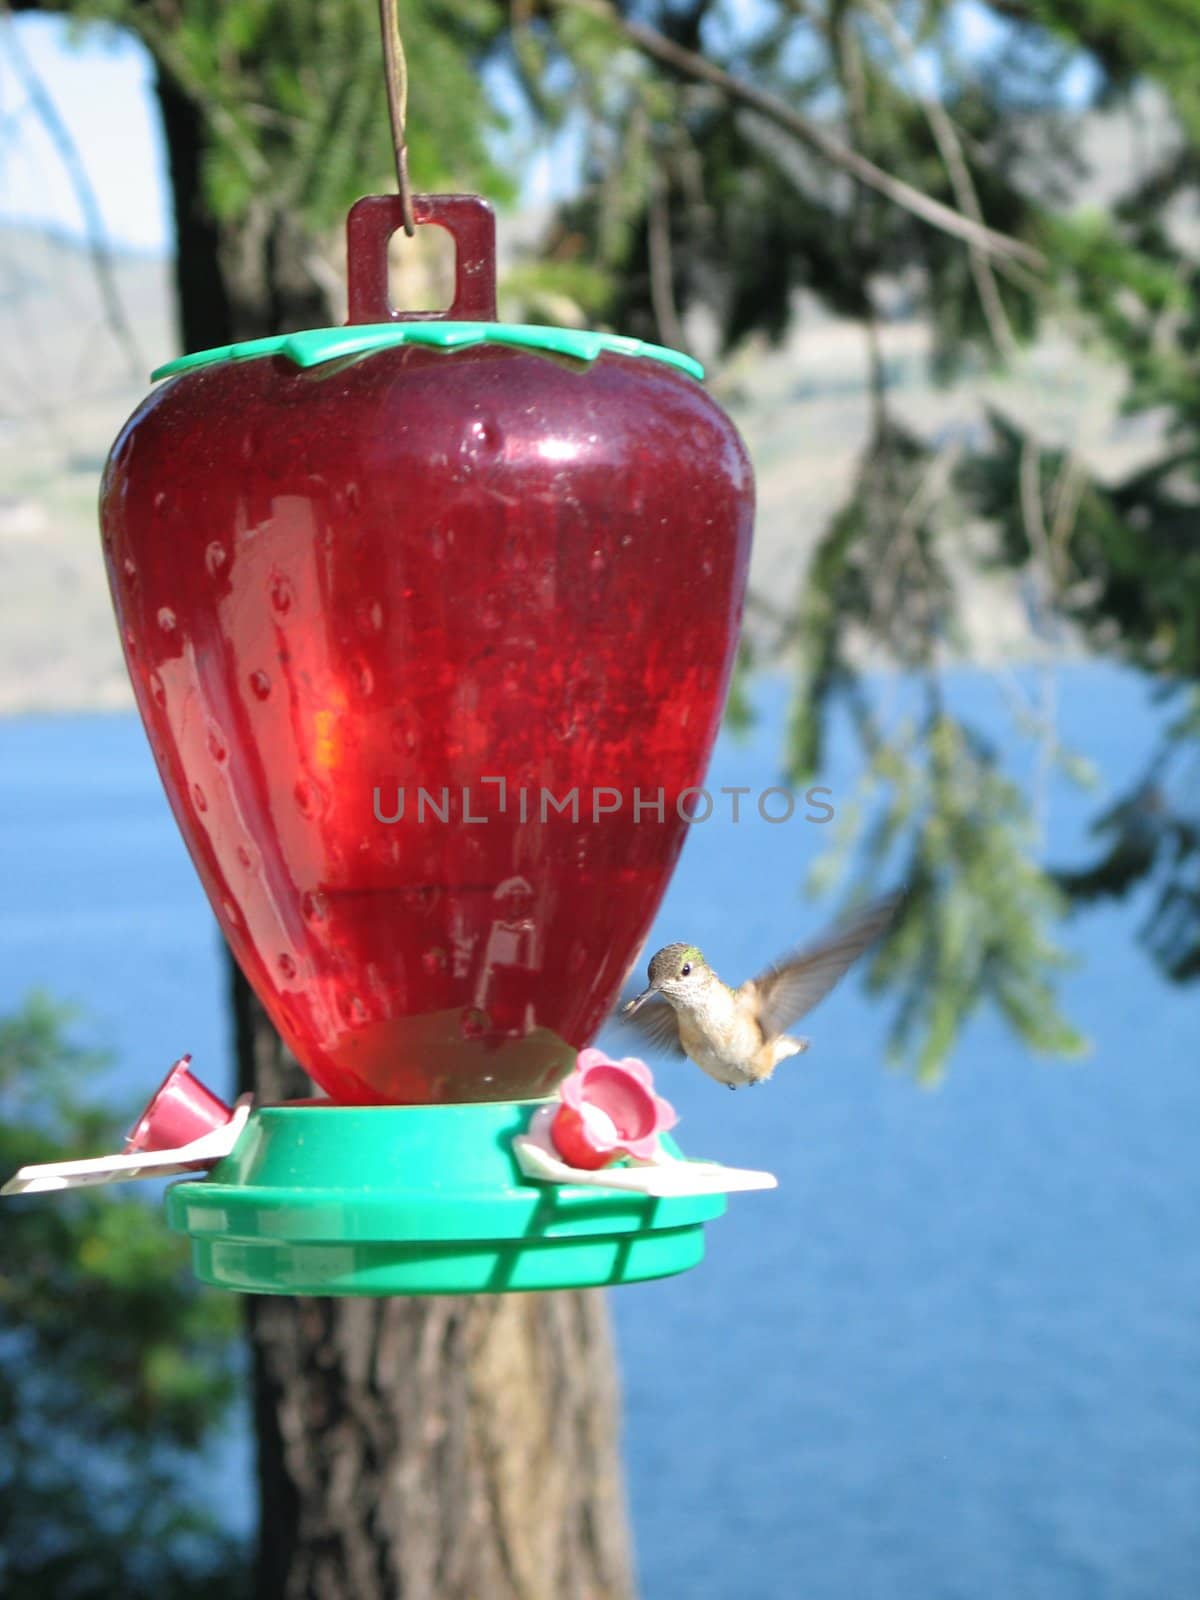 hummingbird drinking out of a feeder